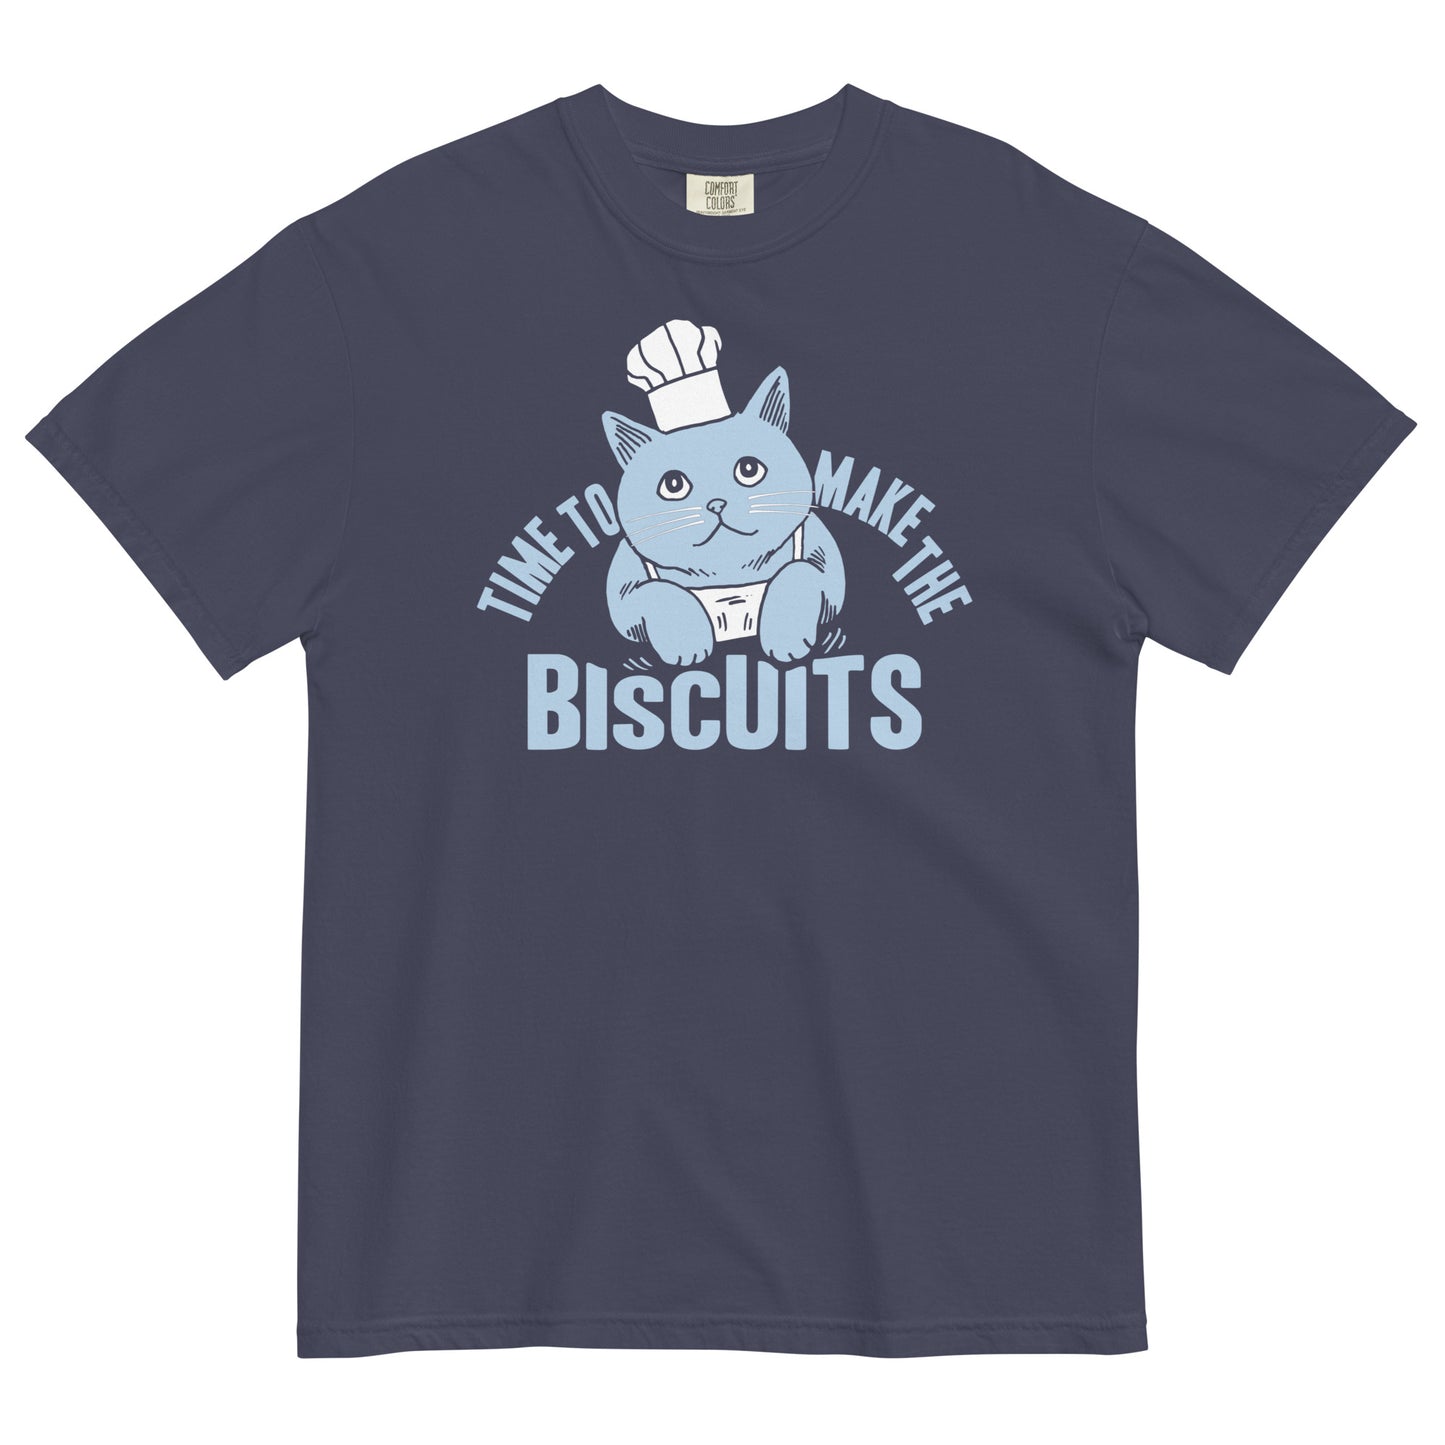 Time To Make The Biscuits Men's Relaxed Fit Tee